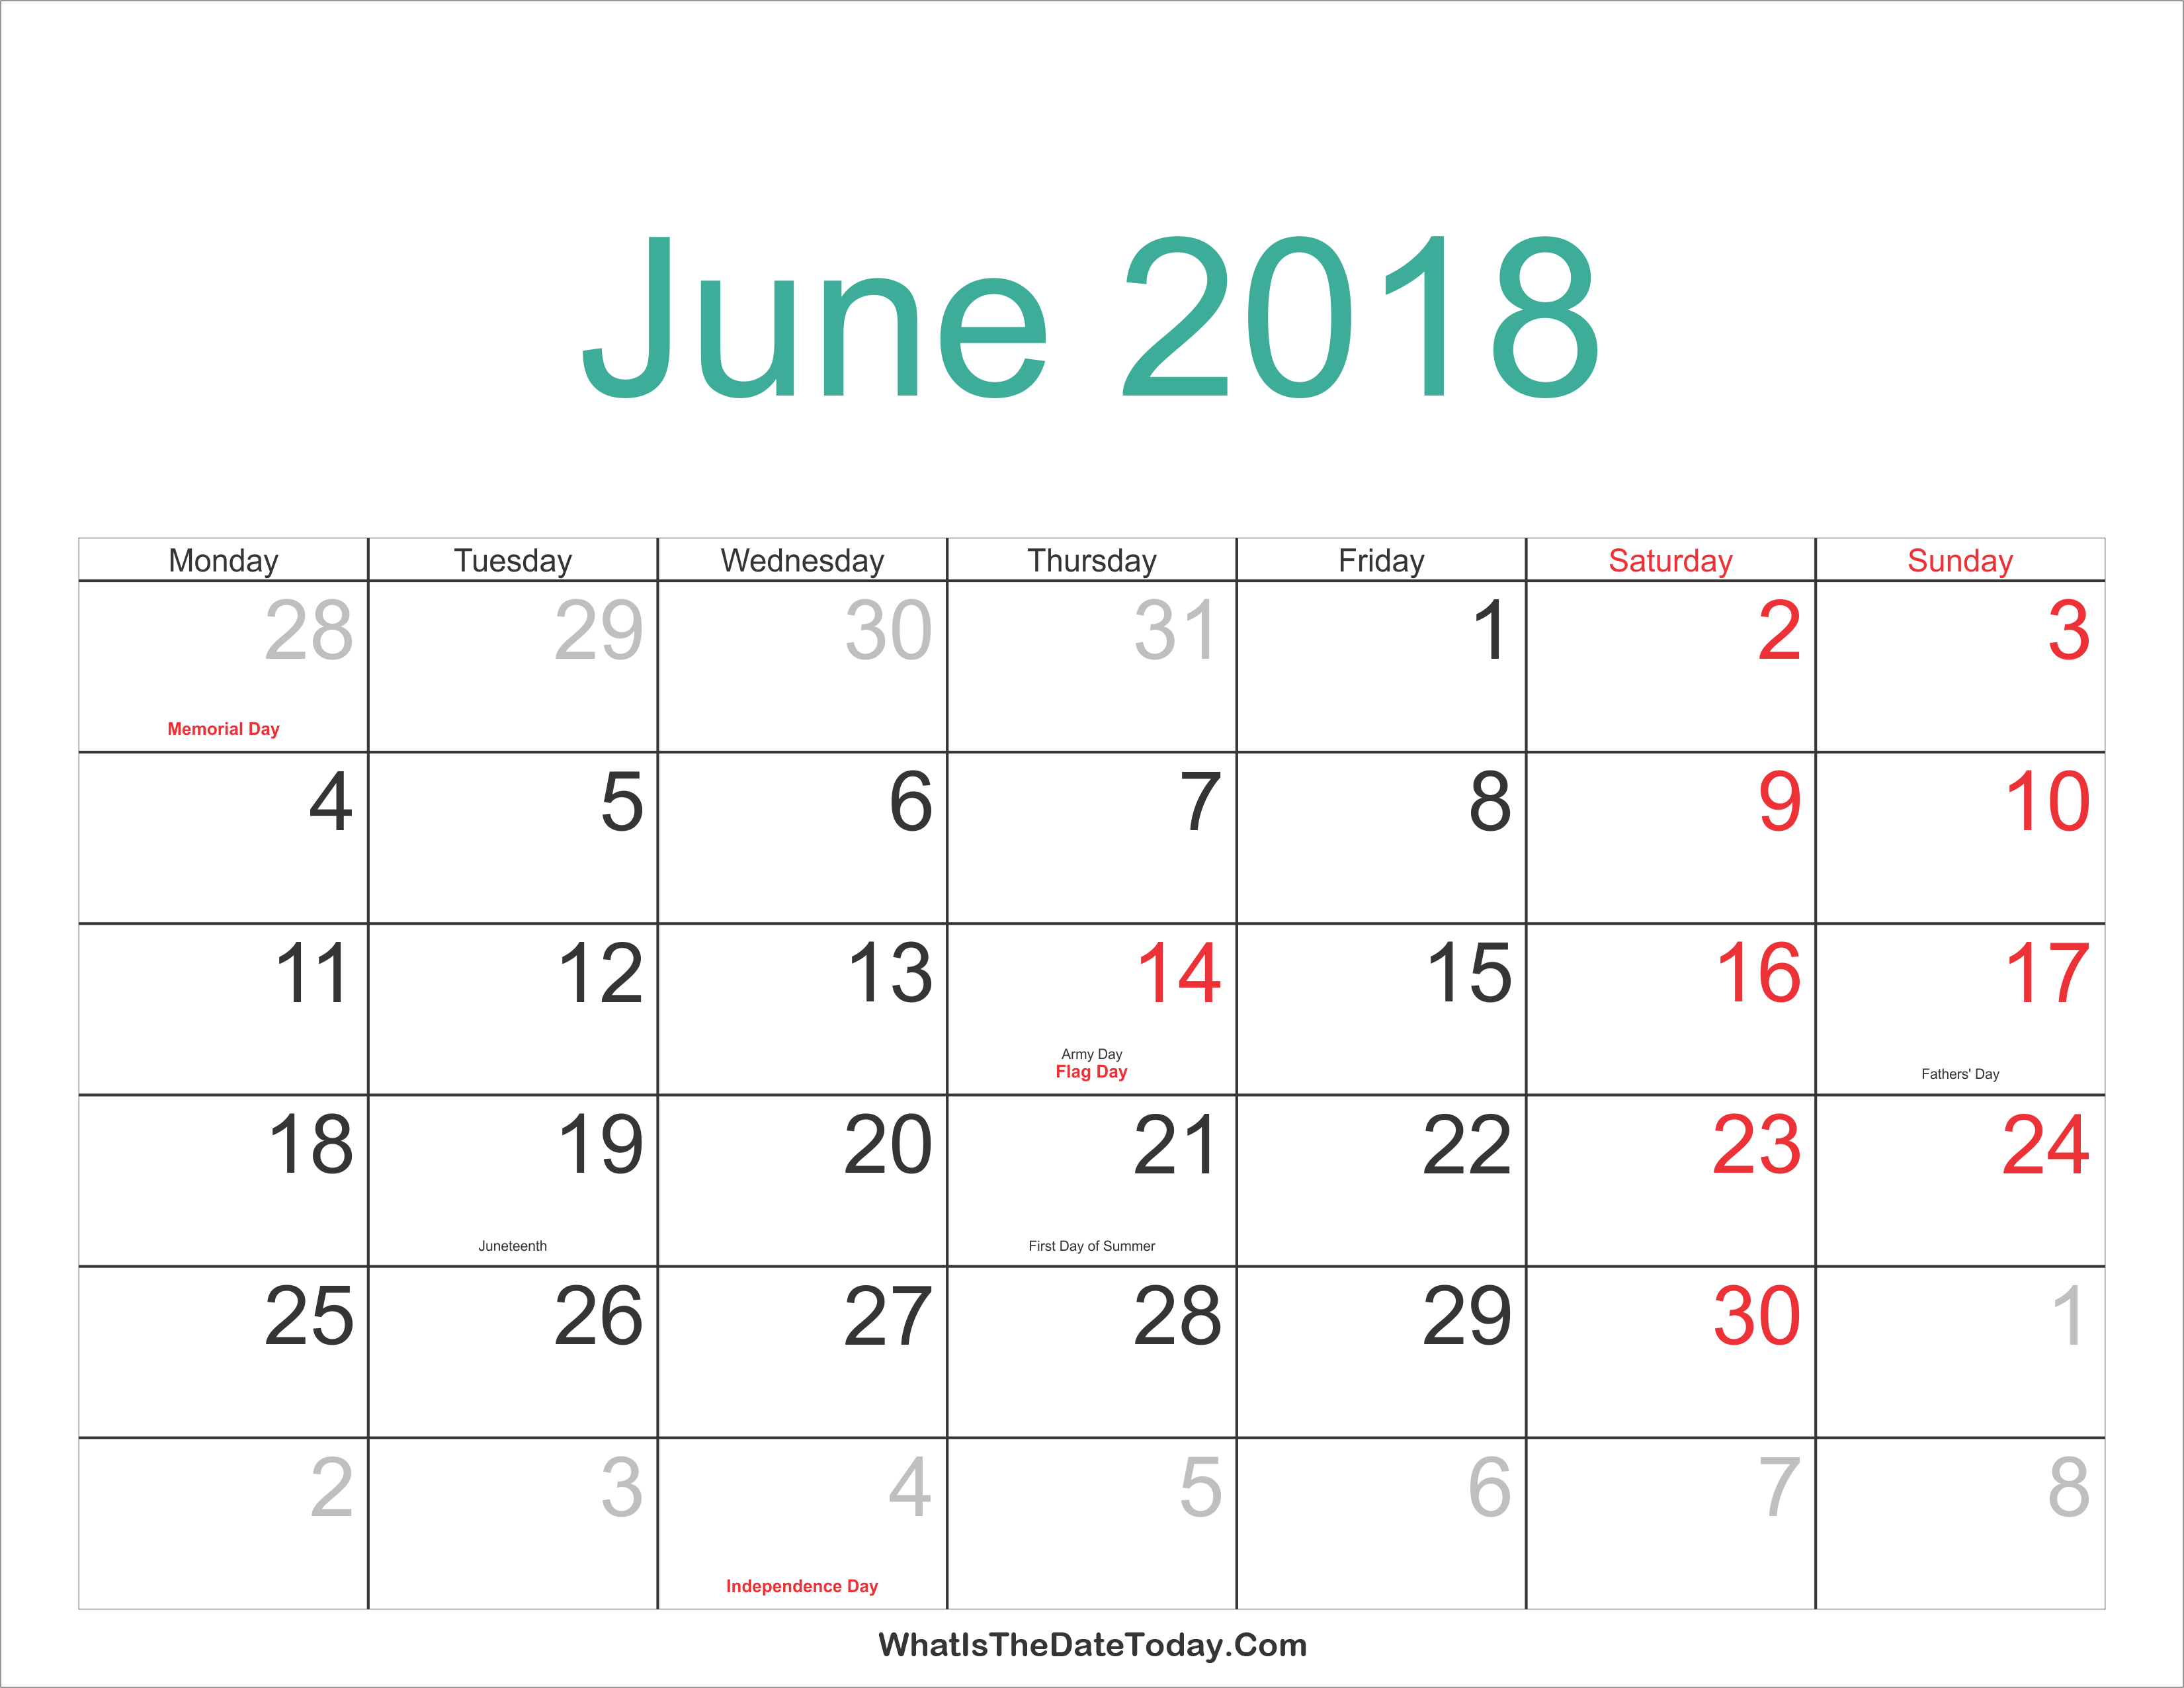 june-2018-calendar-with-holidays-reminders-oppidan-library